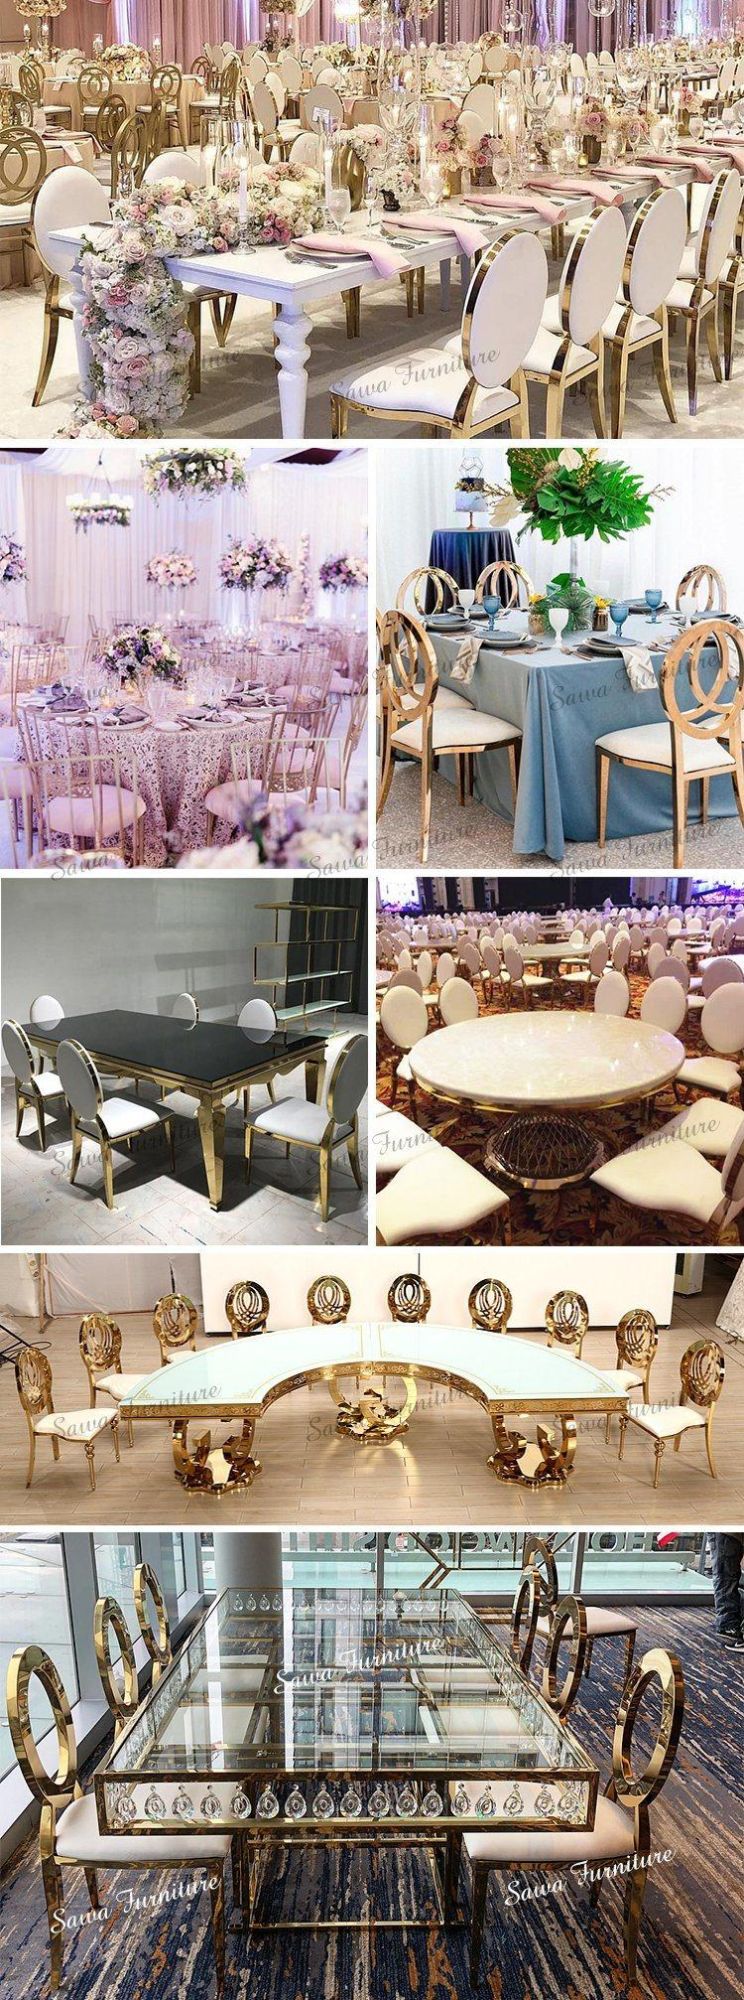 Classical Decoration Plastic Resin Clear Chairs Event Hotel Wedding Banquet Chairs